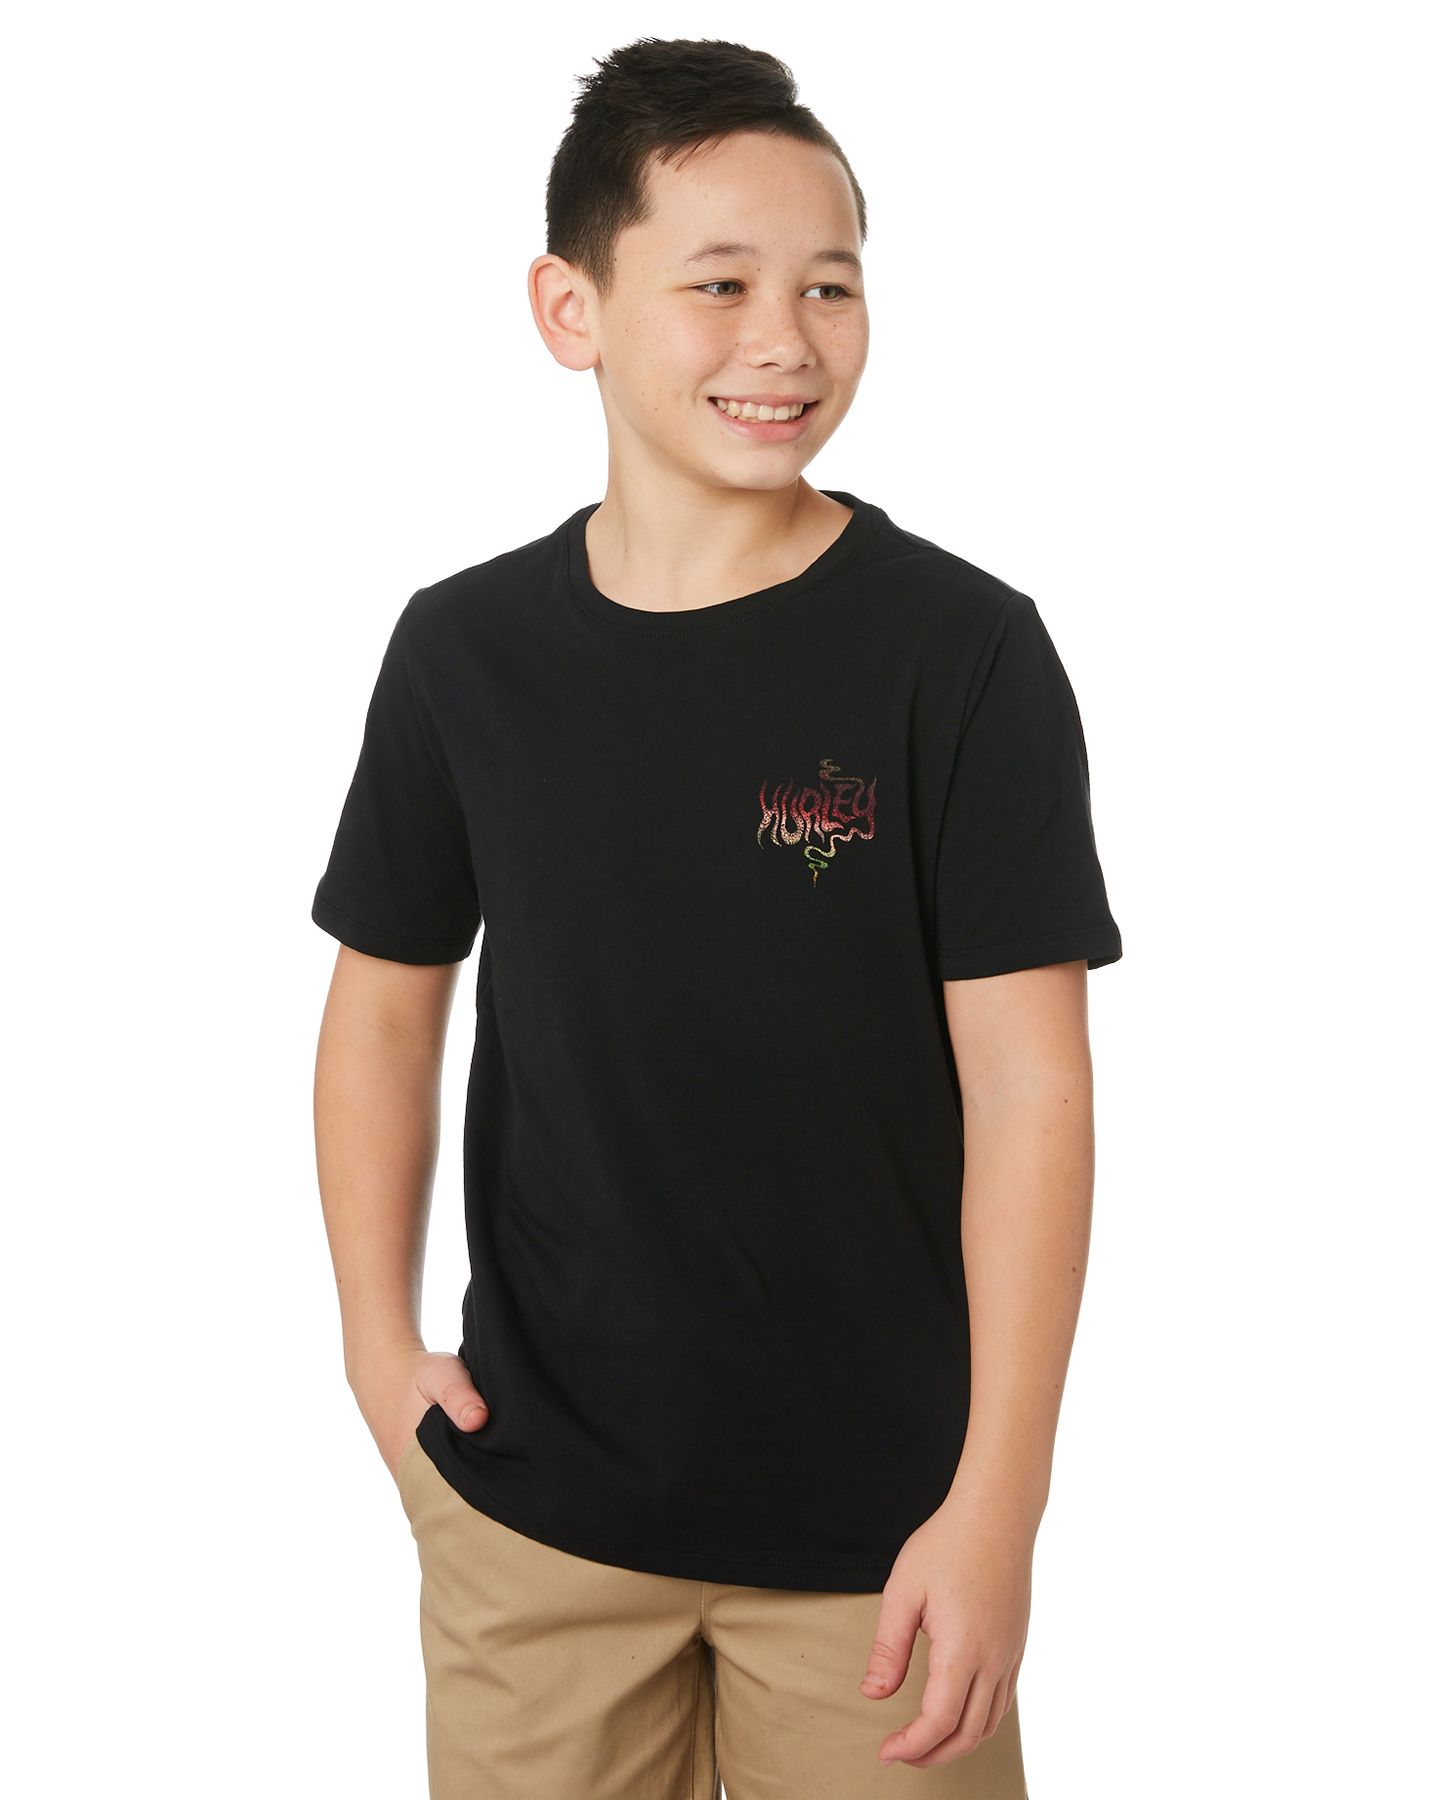 Hurley Youth Boys Prm Search And Destroy Tee - Black | SurfStitch